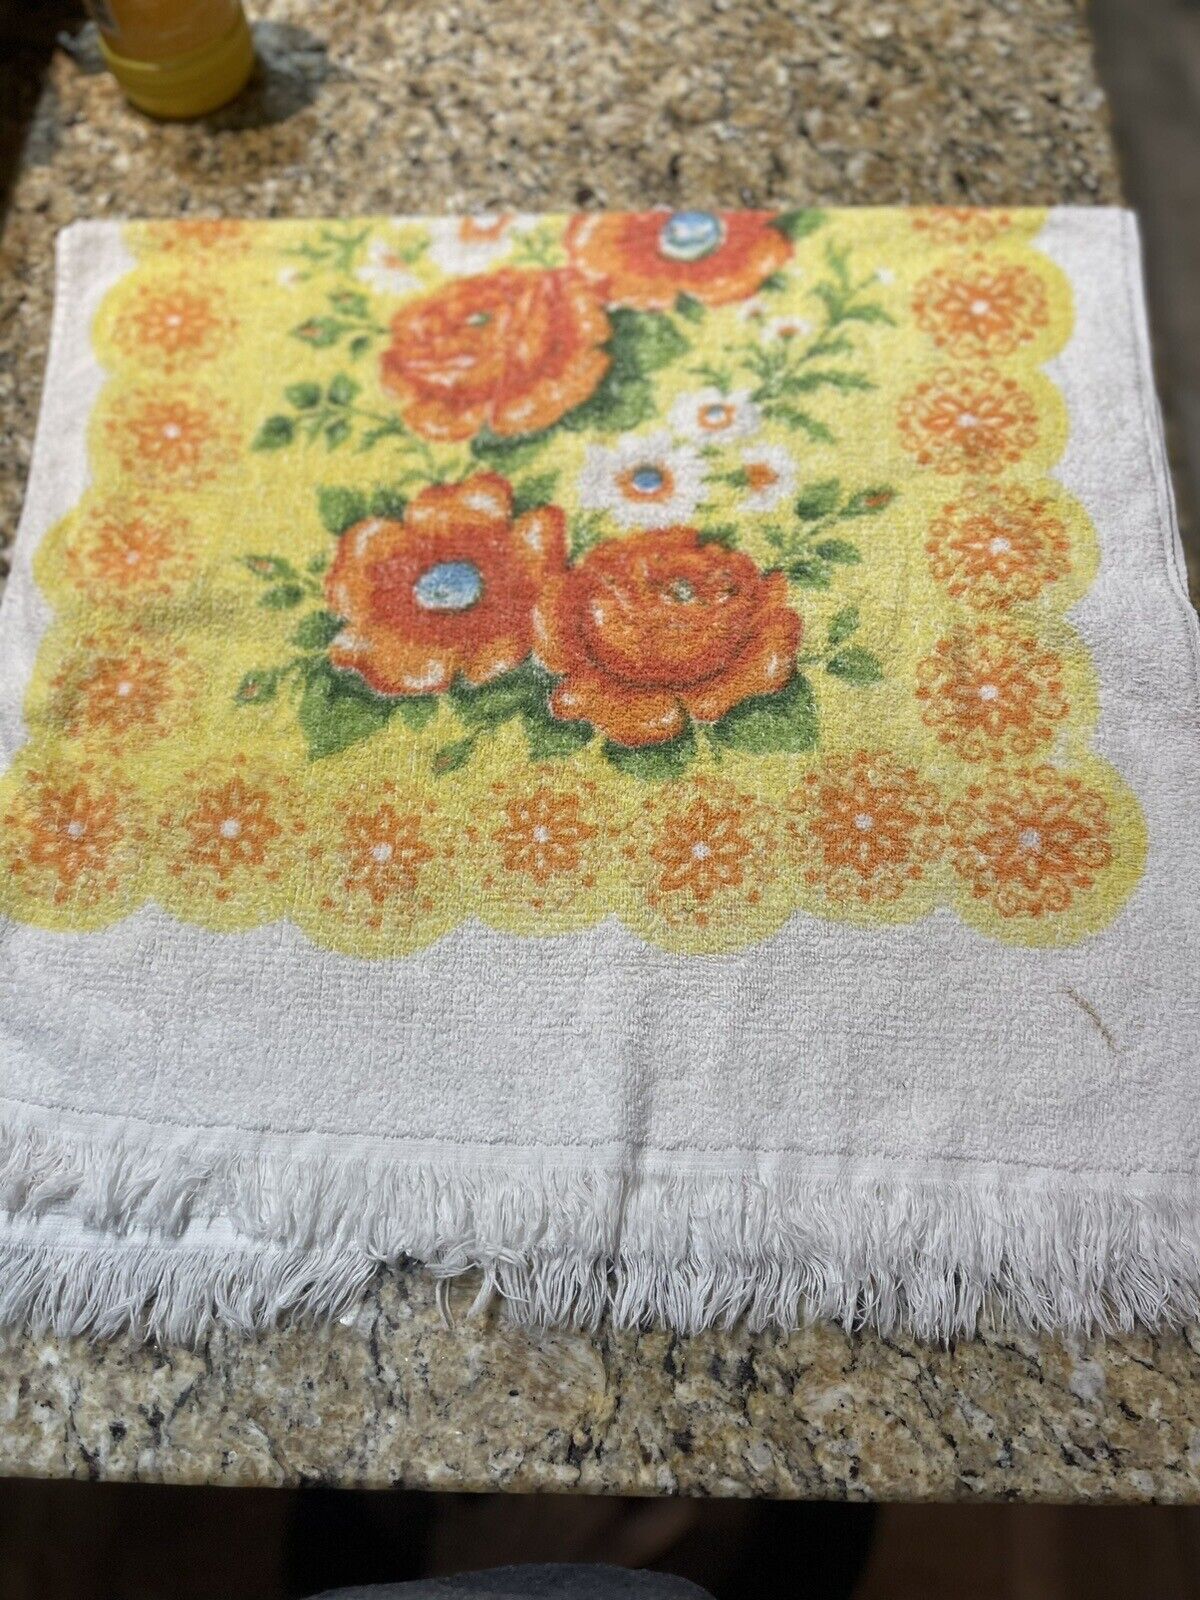 VINTAGE TERRY CLOTH FRINGED GRANNY TOWEL BRIGHT ROSES MADE IN USA Orange Yellow